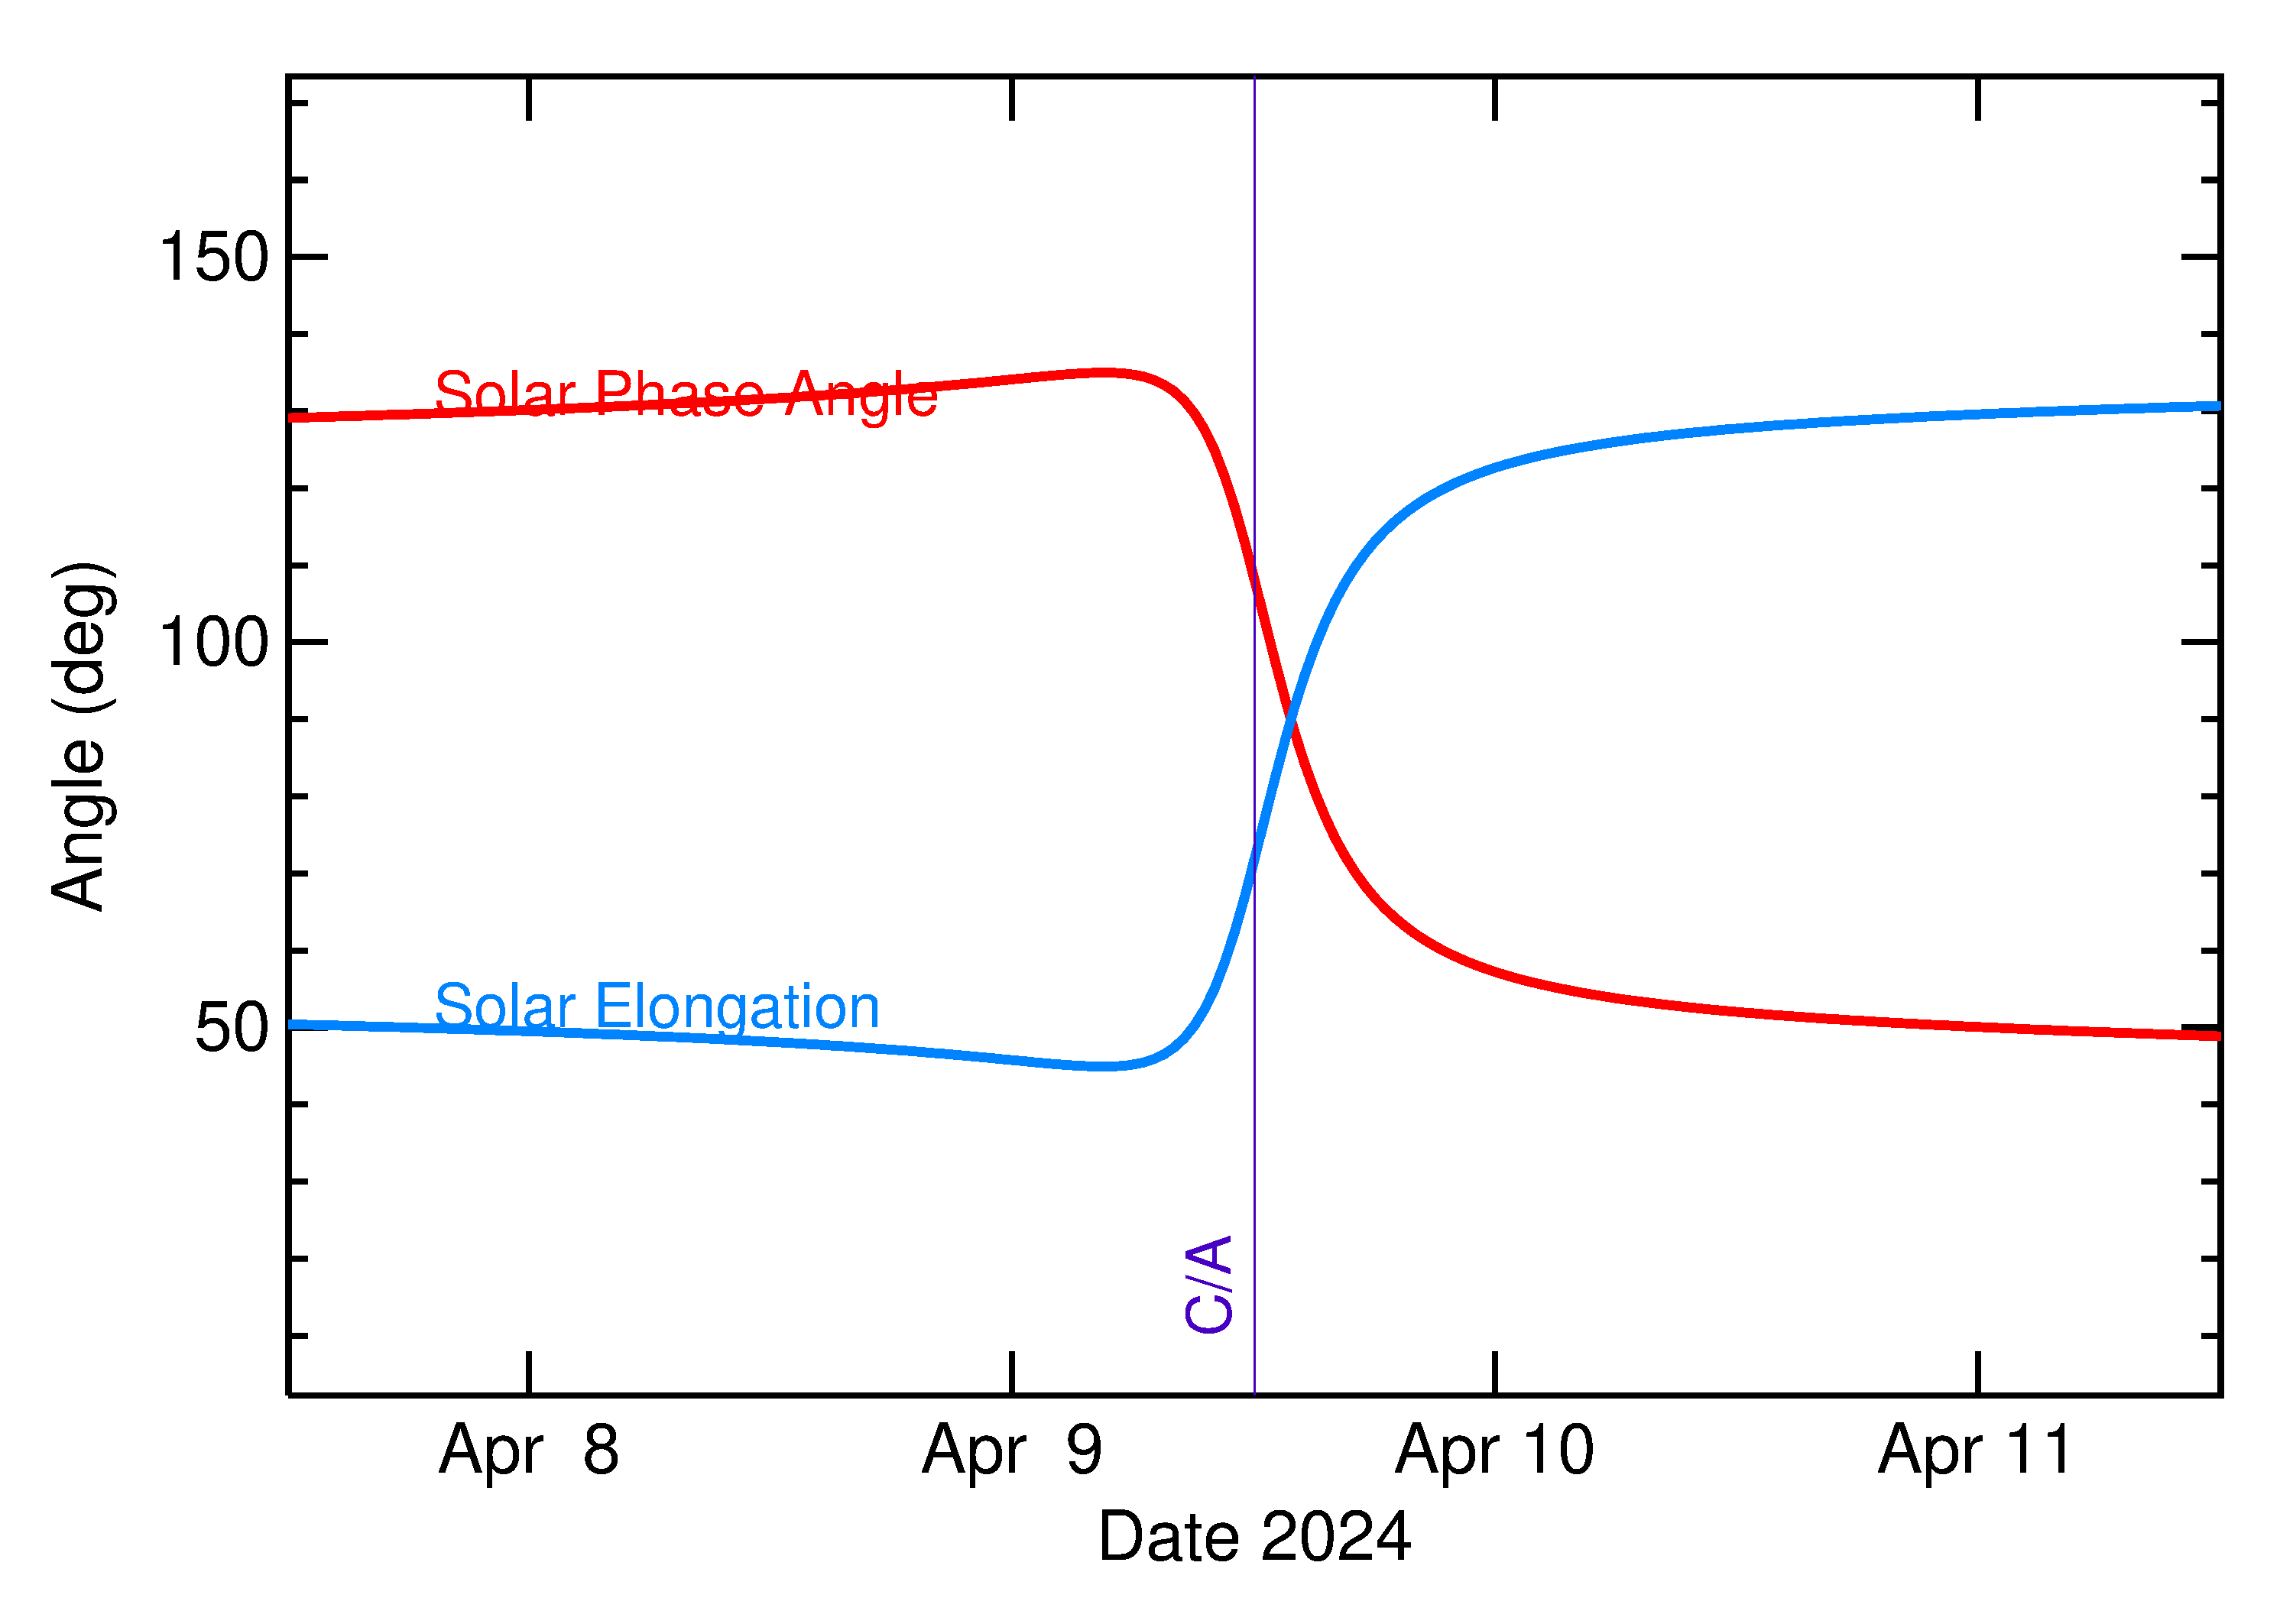 Solar Elongation and Solar Phase Angle of 2024 GY4 in the days around closest approach